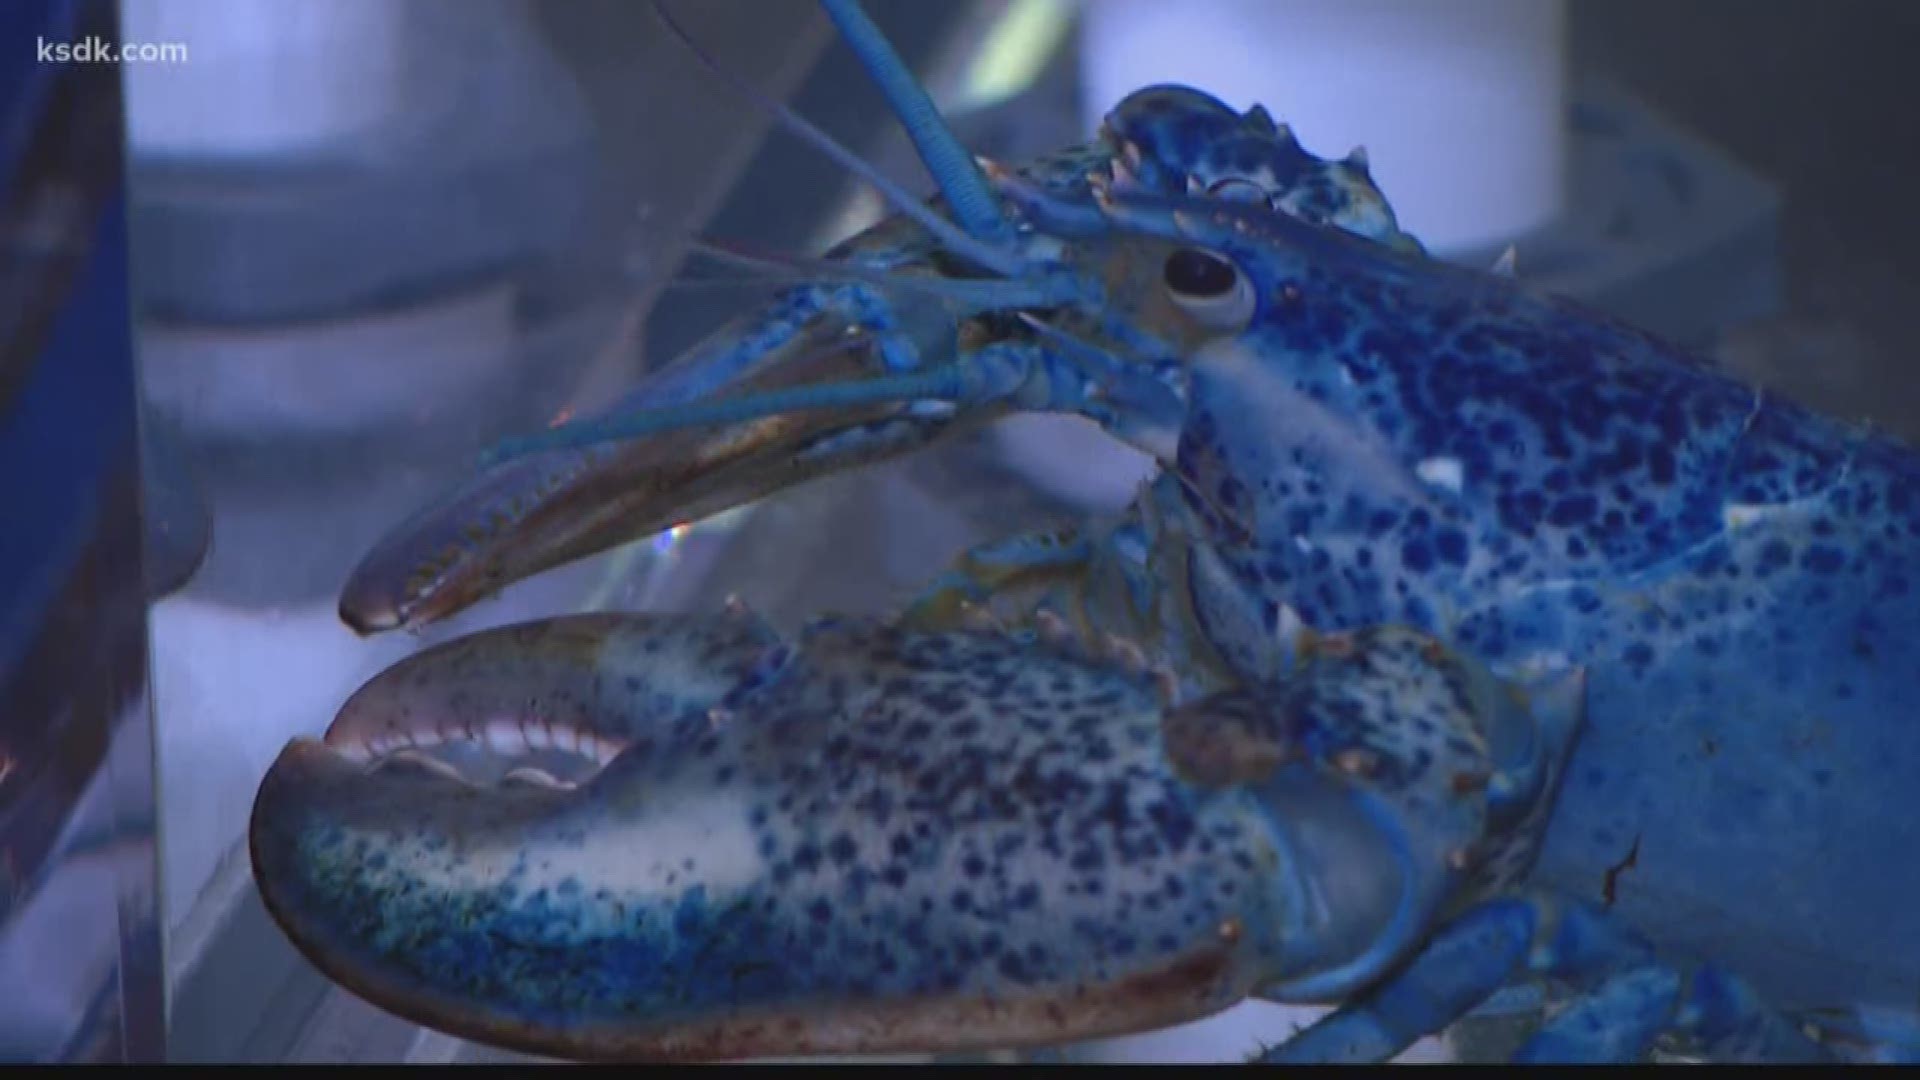 The rare blue lobster donated from a Cape Cod restaurant in honor of the Blues' Stanley Cup win arrived in St. Louis on Friday.